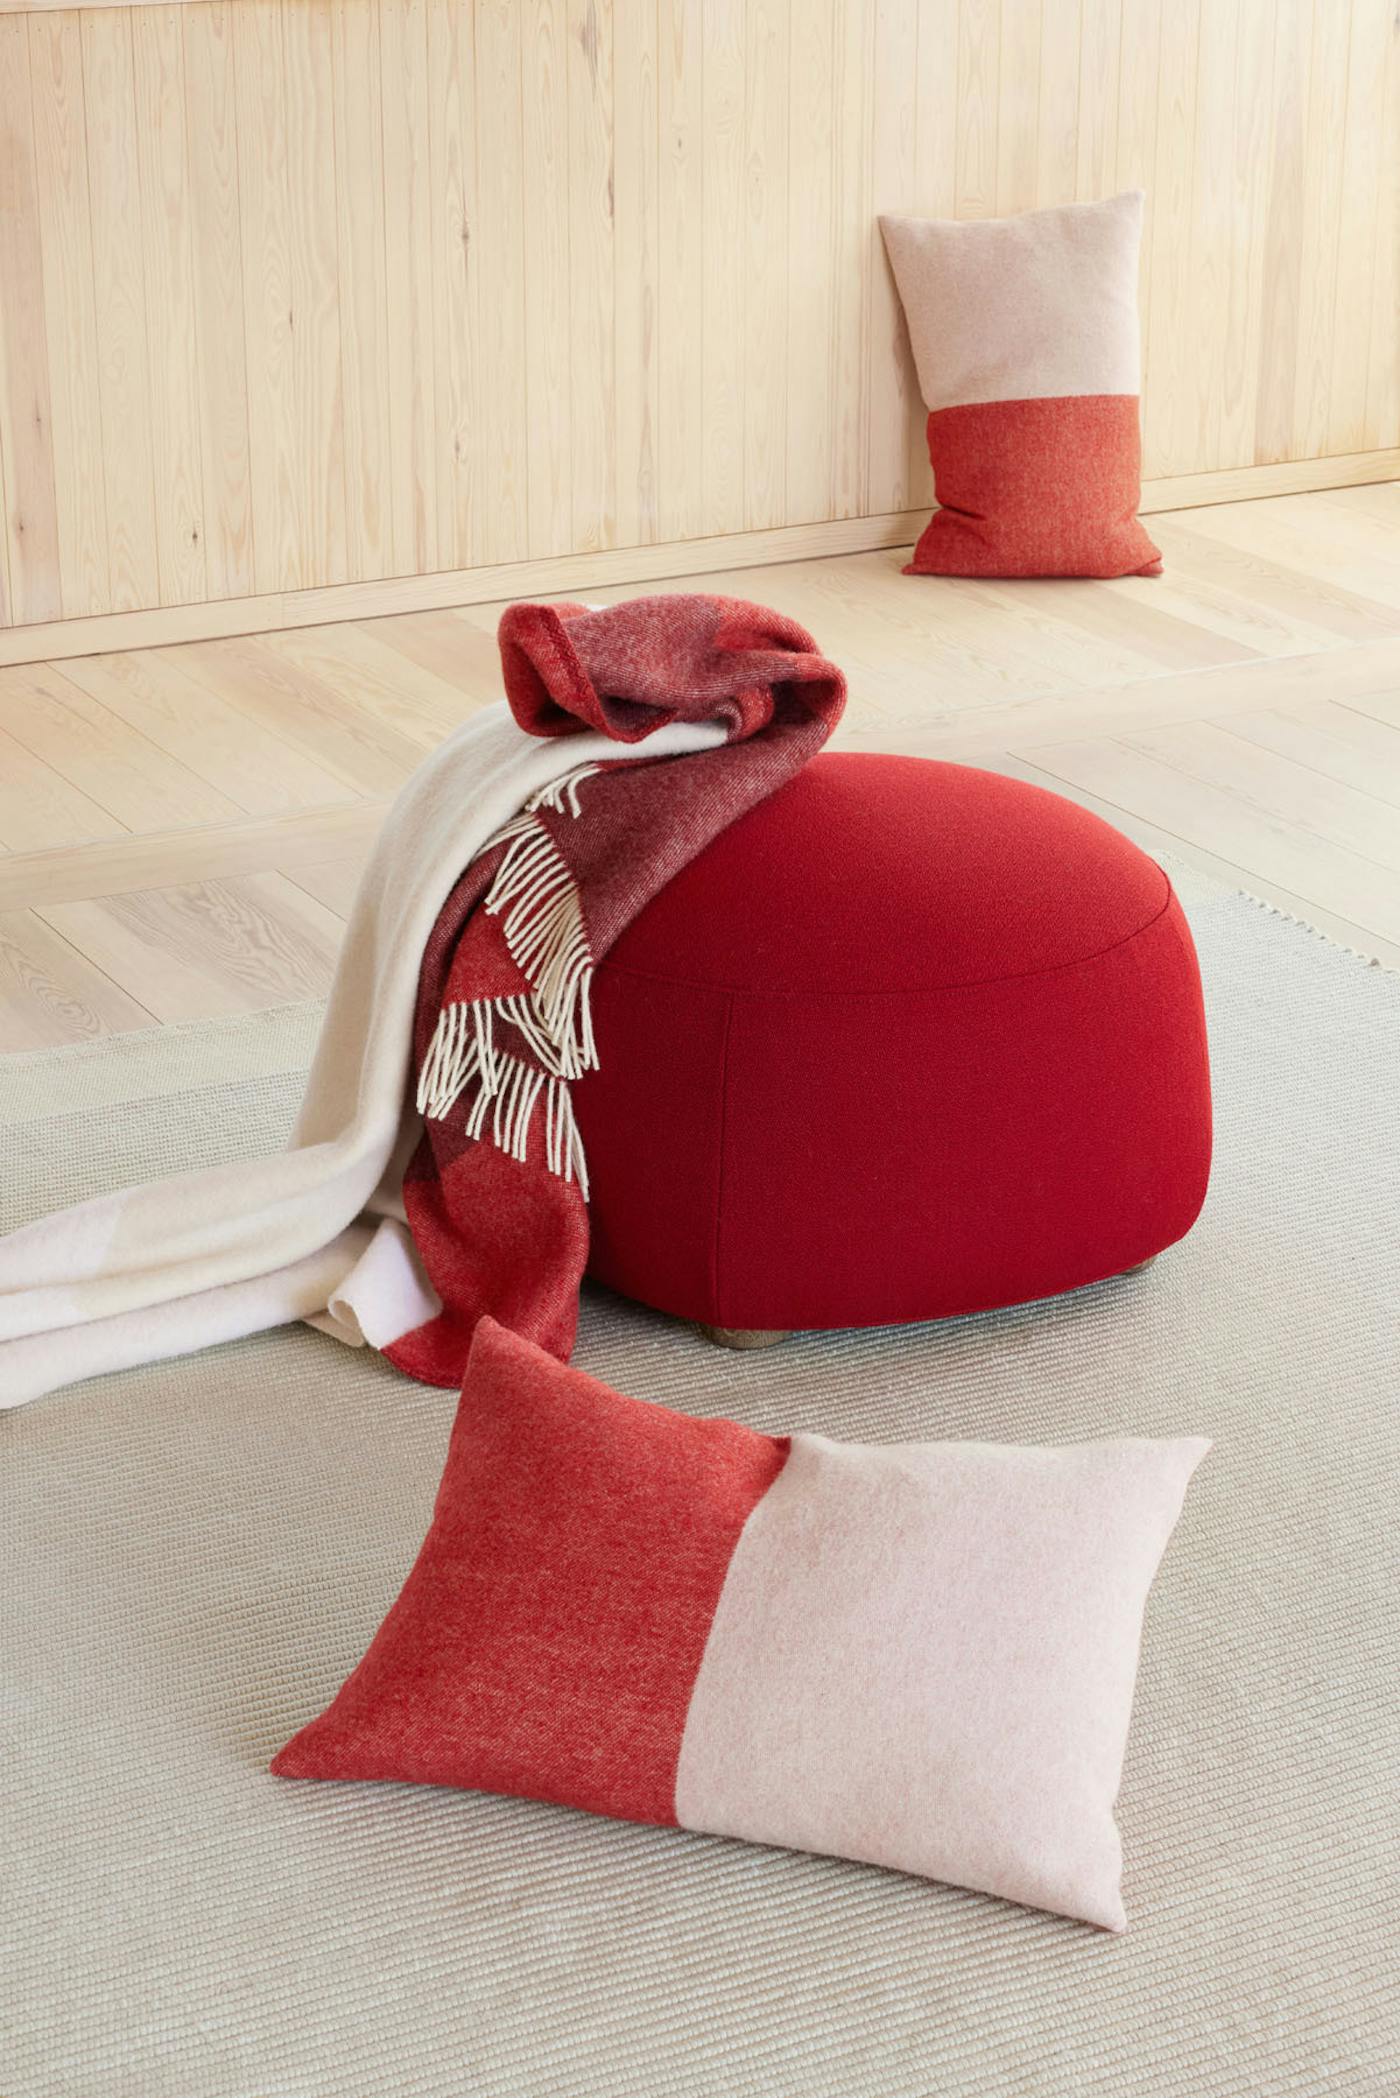 Echo cushion blanket red group on floor Northern Ph Sara Spilling lowres